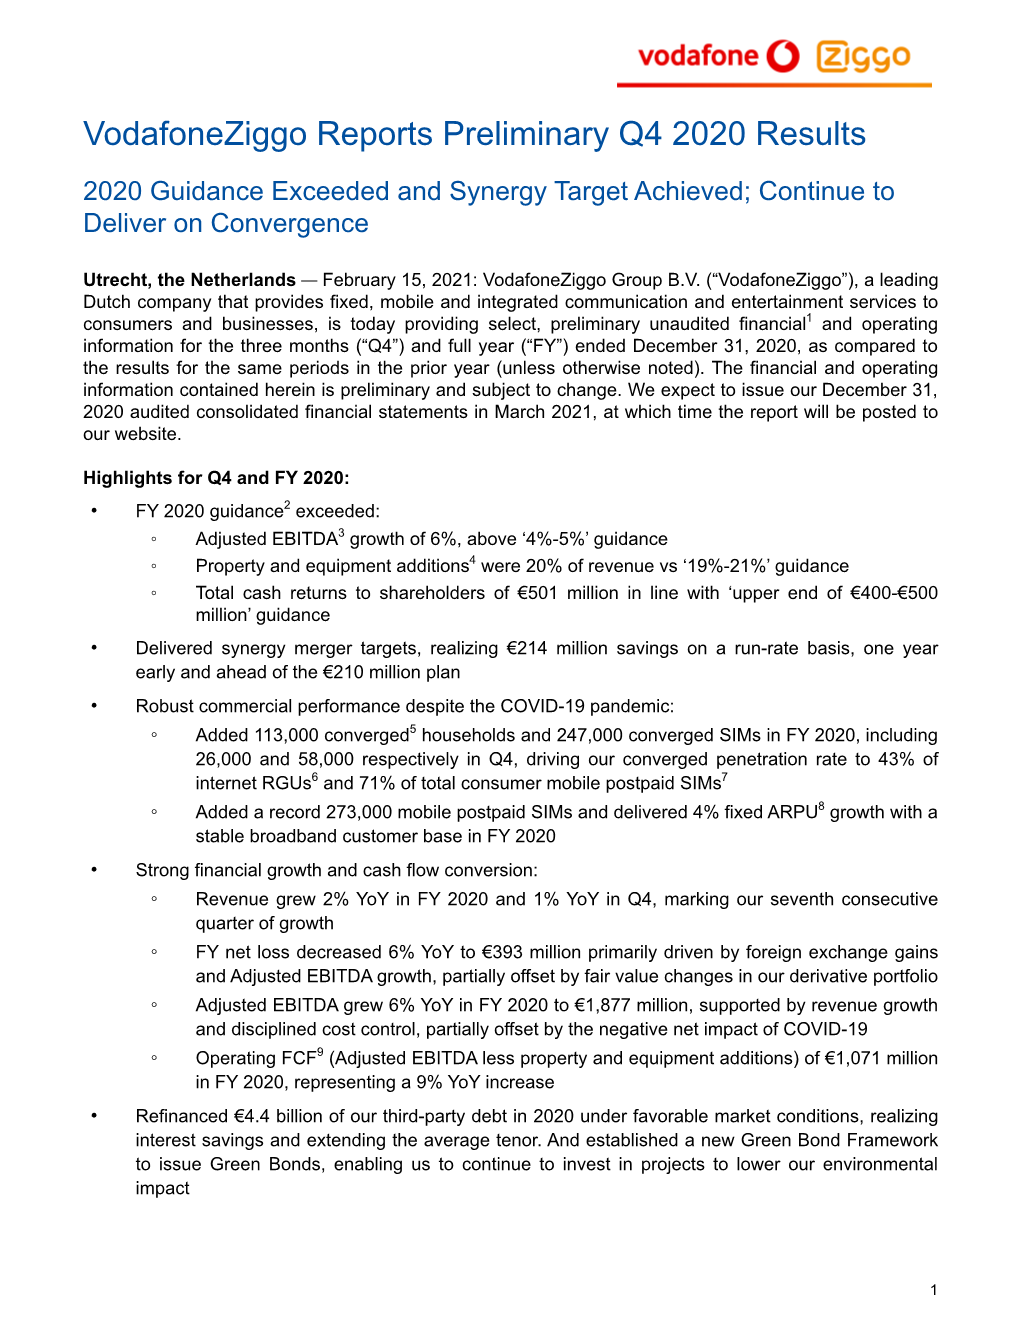 Vodafoneziggo Reports Preliminary Q4 2020 Results 2020 Guidance Exceeded and Synergy Target Achieved; Continue to Deliver on Convergence